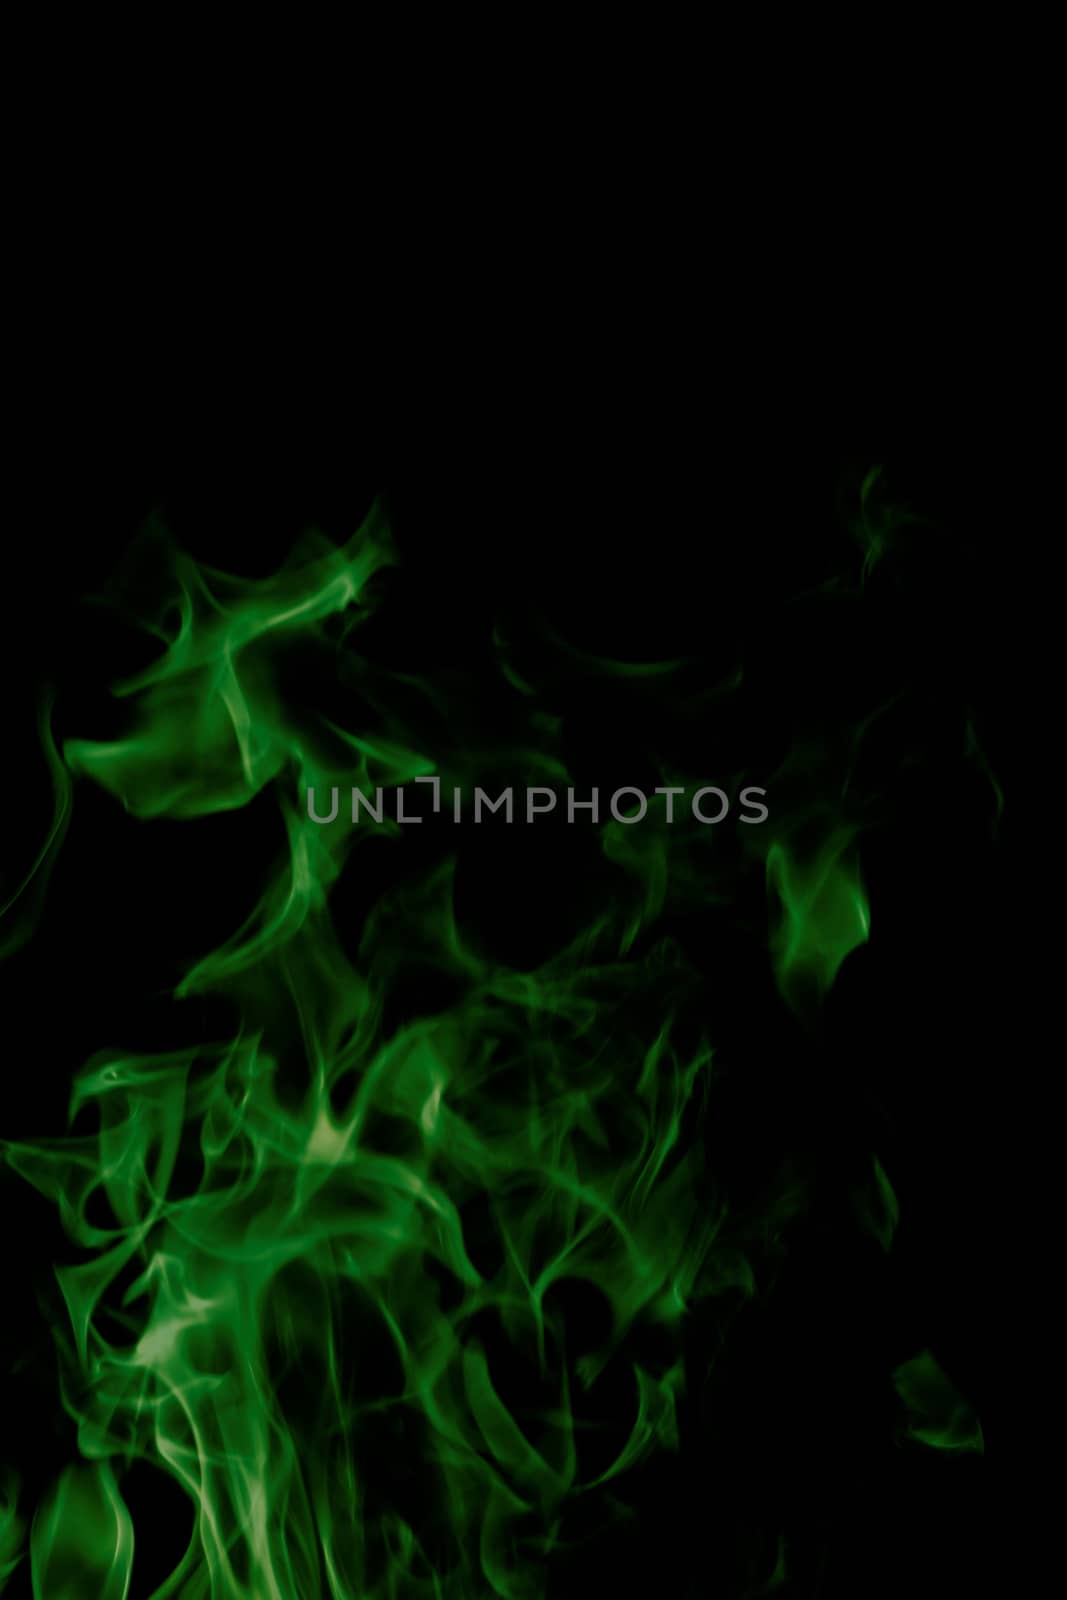 green flames of fire as  abstract backgorund